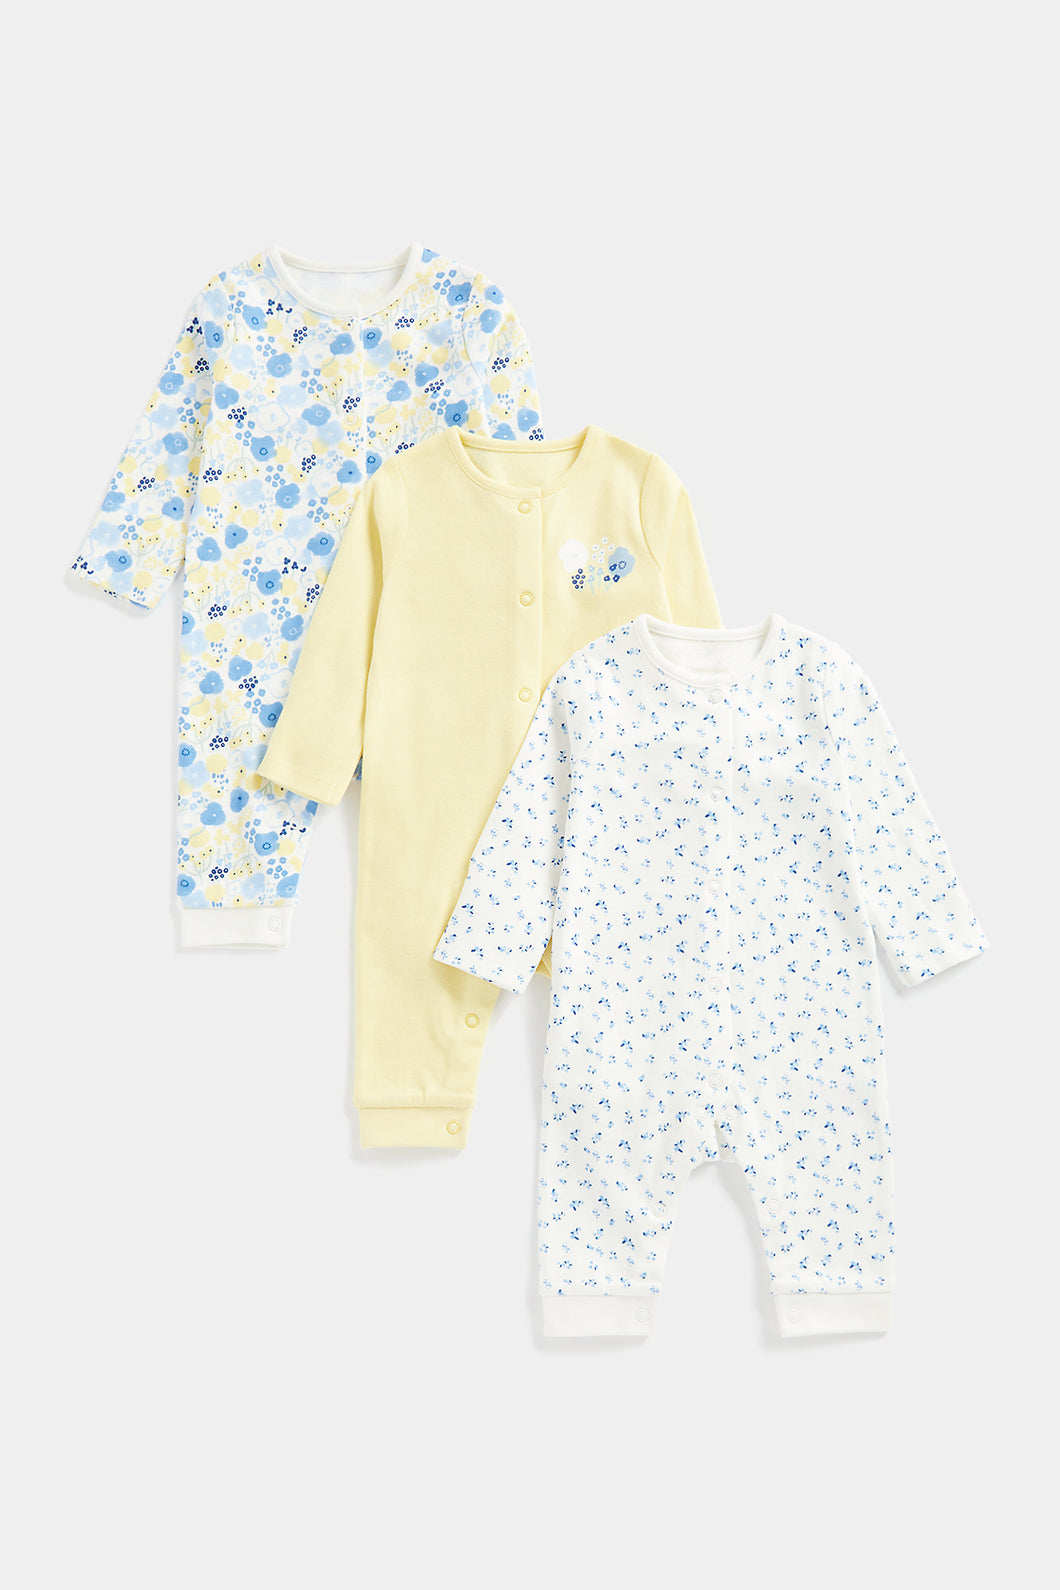 Mothercare Flower Garden Footless Sleepsuits - 3 Pack